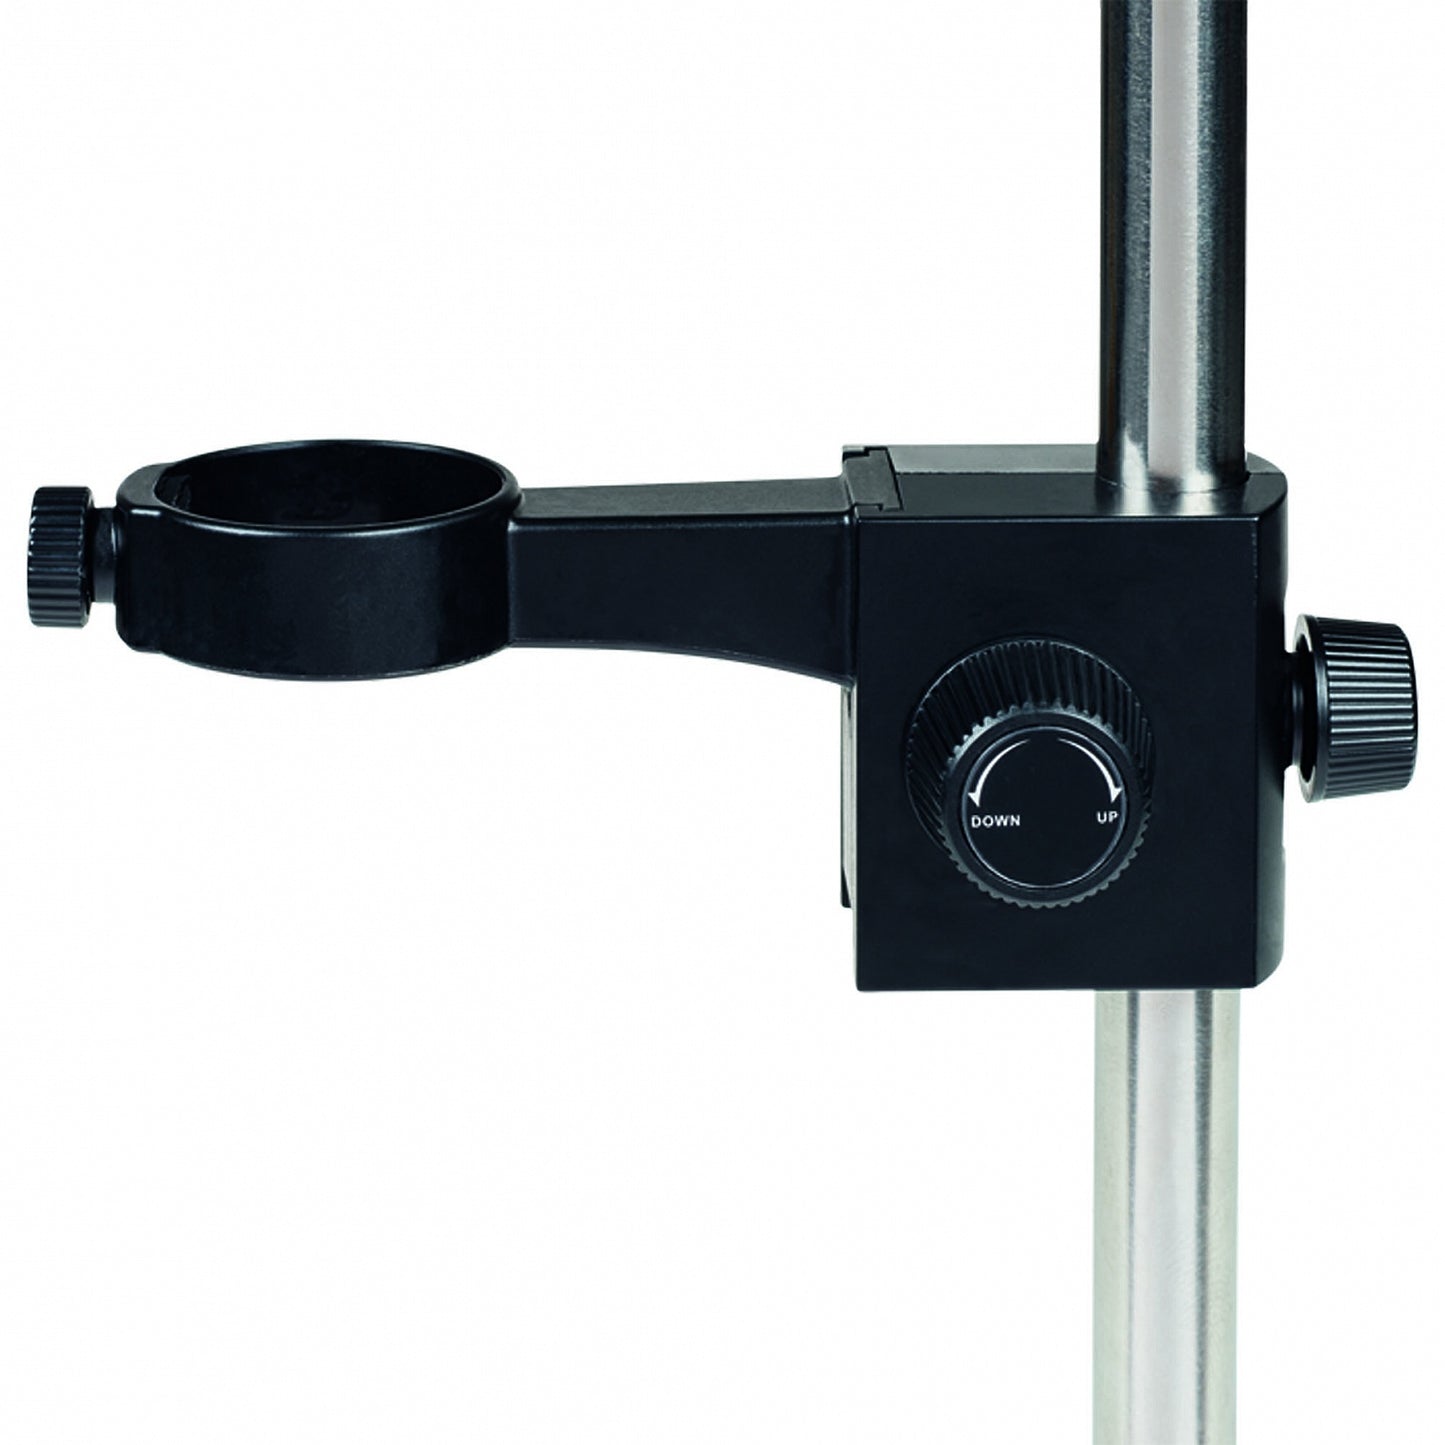 Stand for Digital Microscope